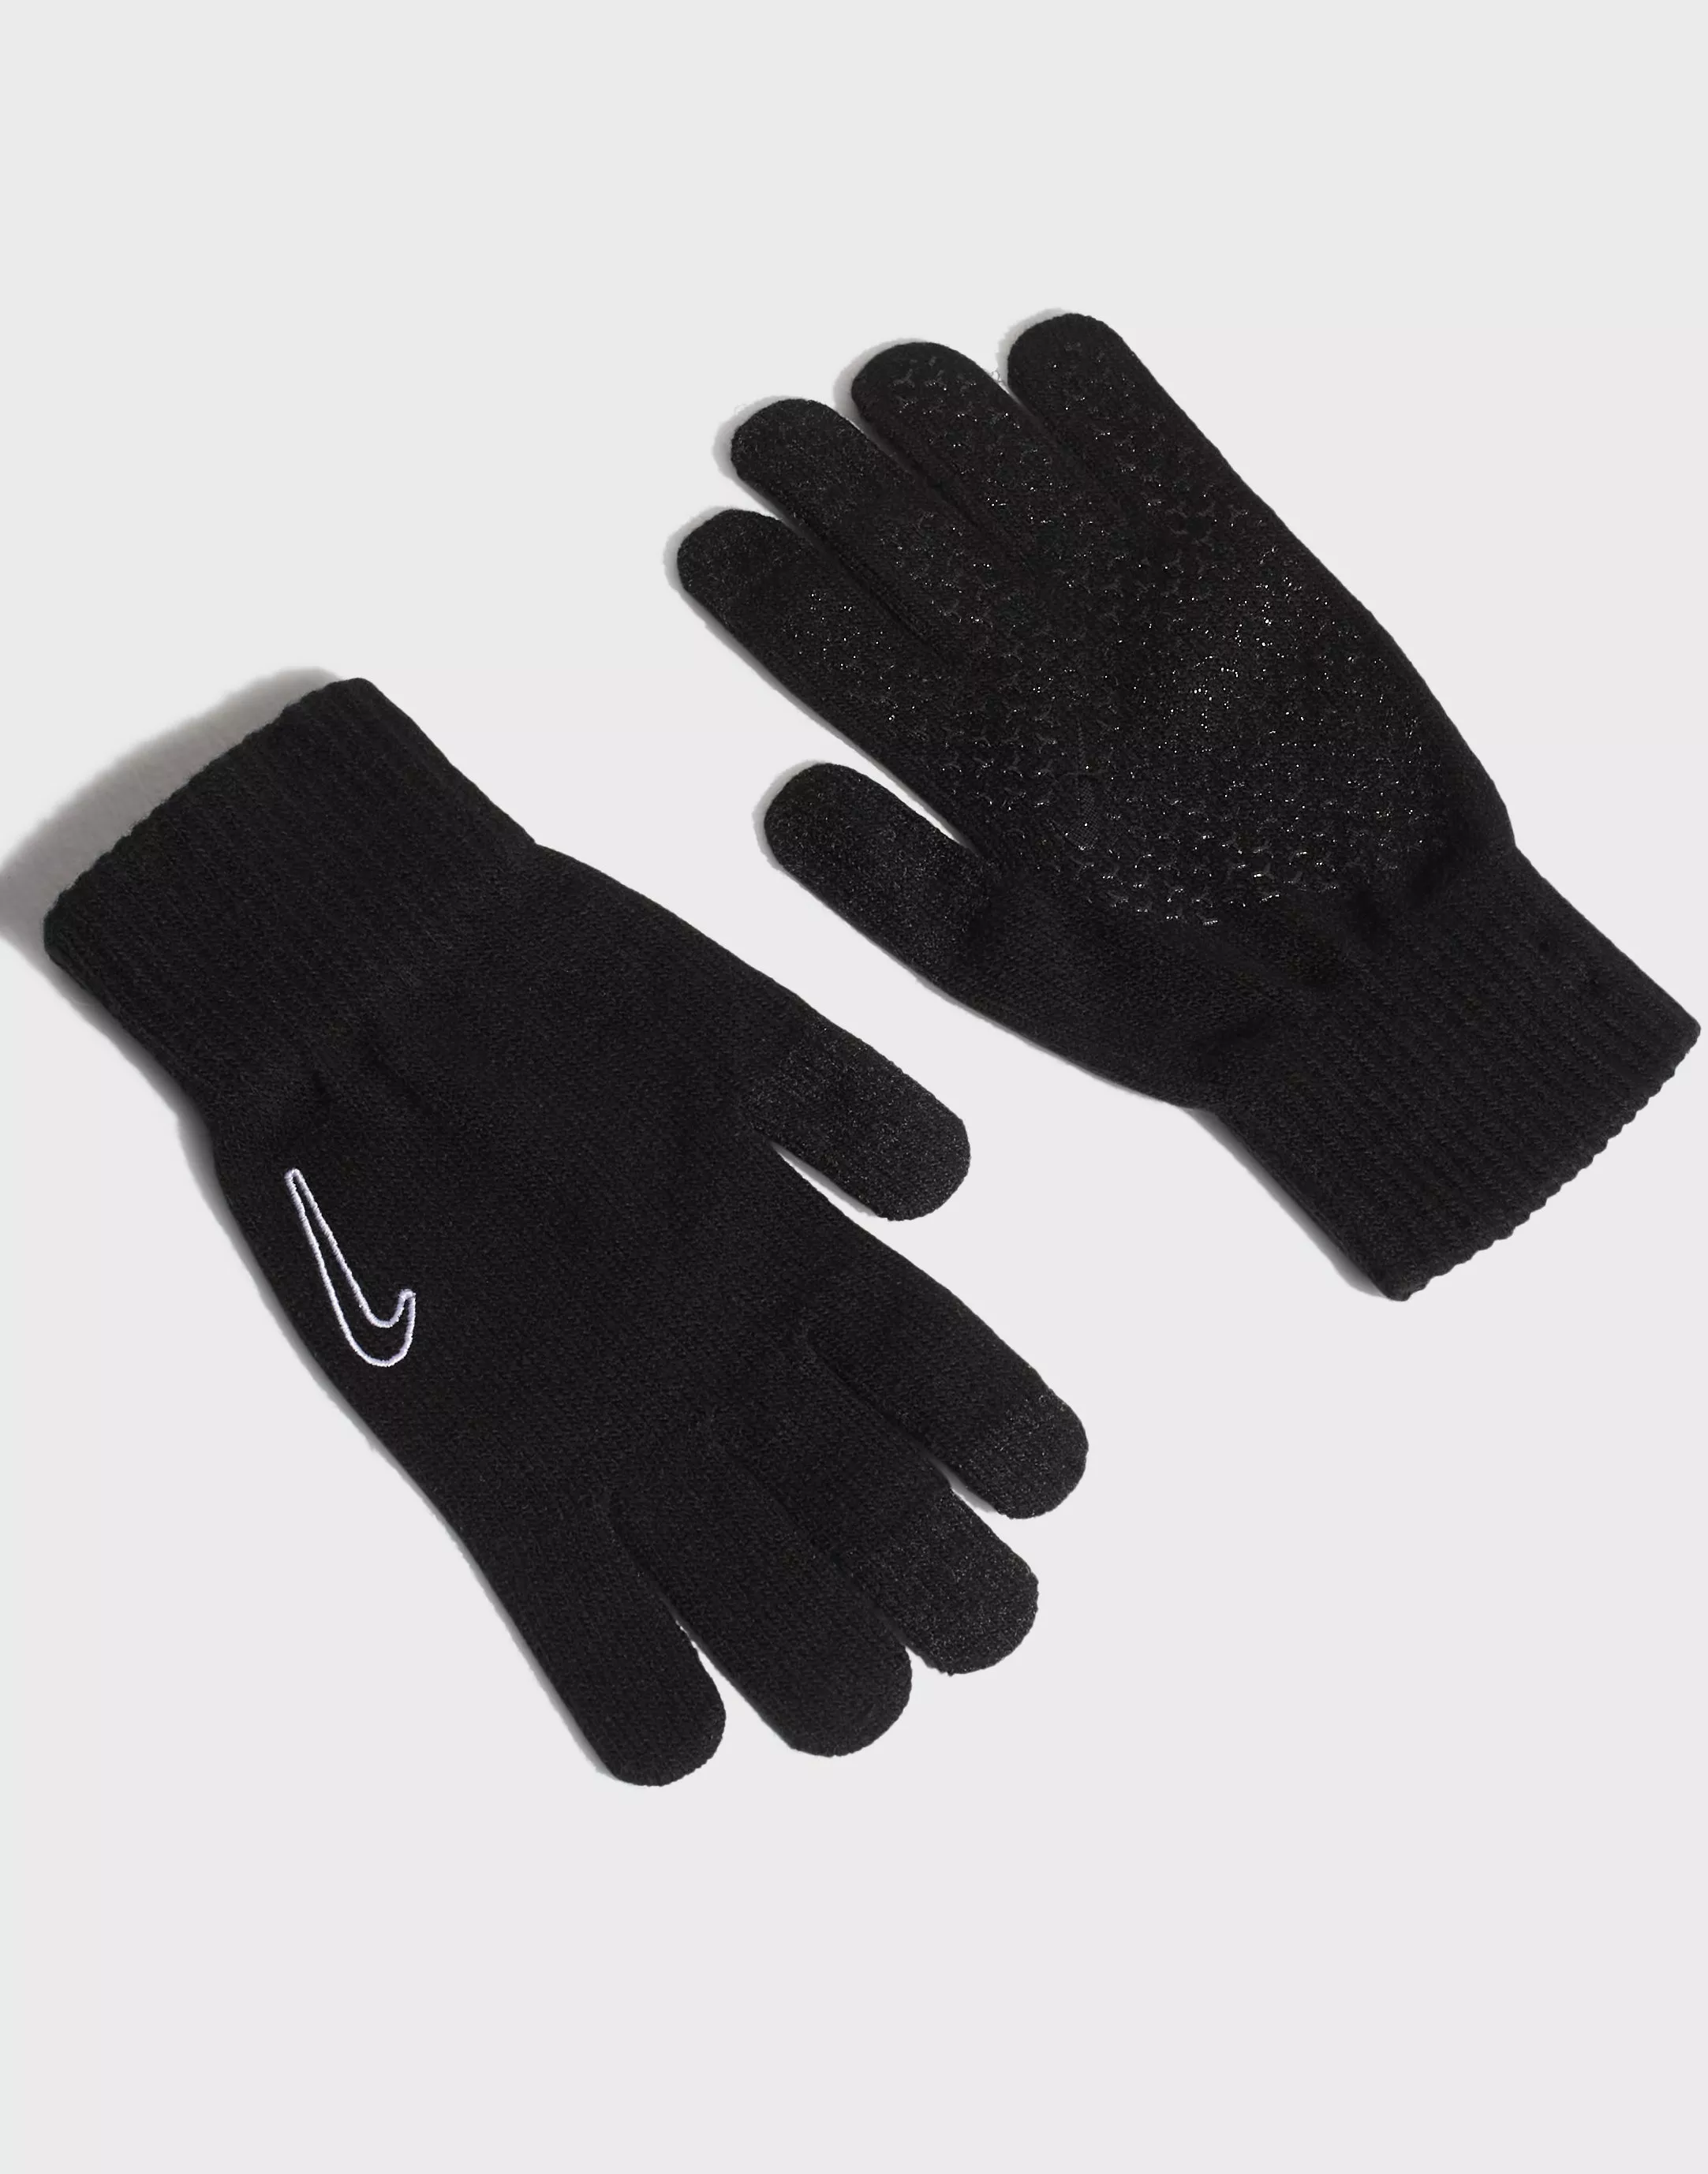 Guantes Nike Knit Tech and Grip TG 2.0 negros